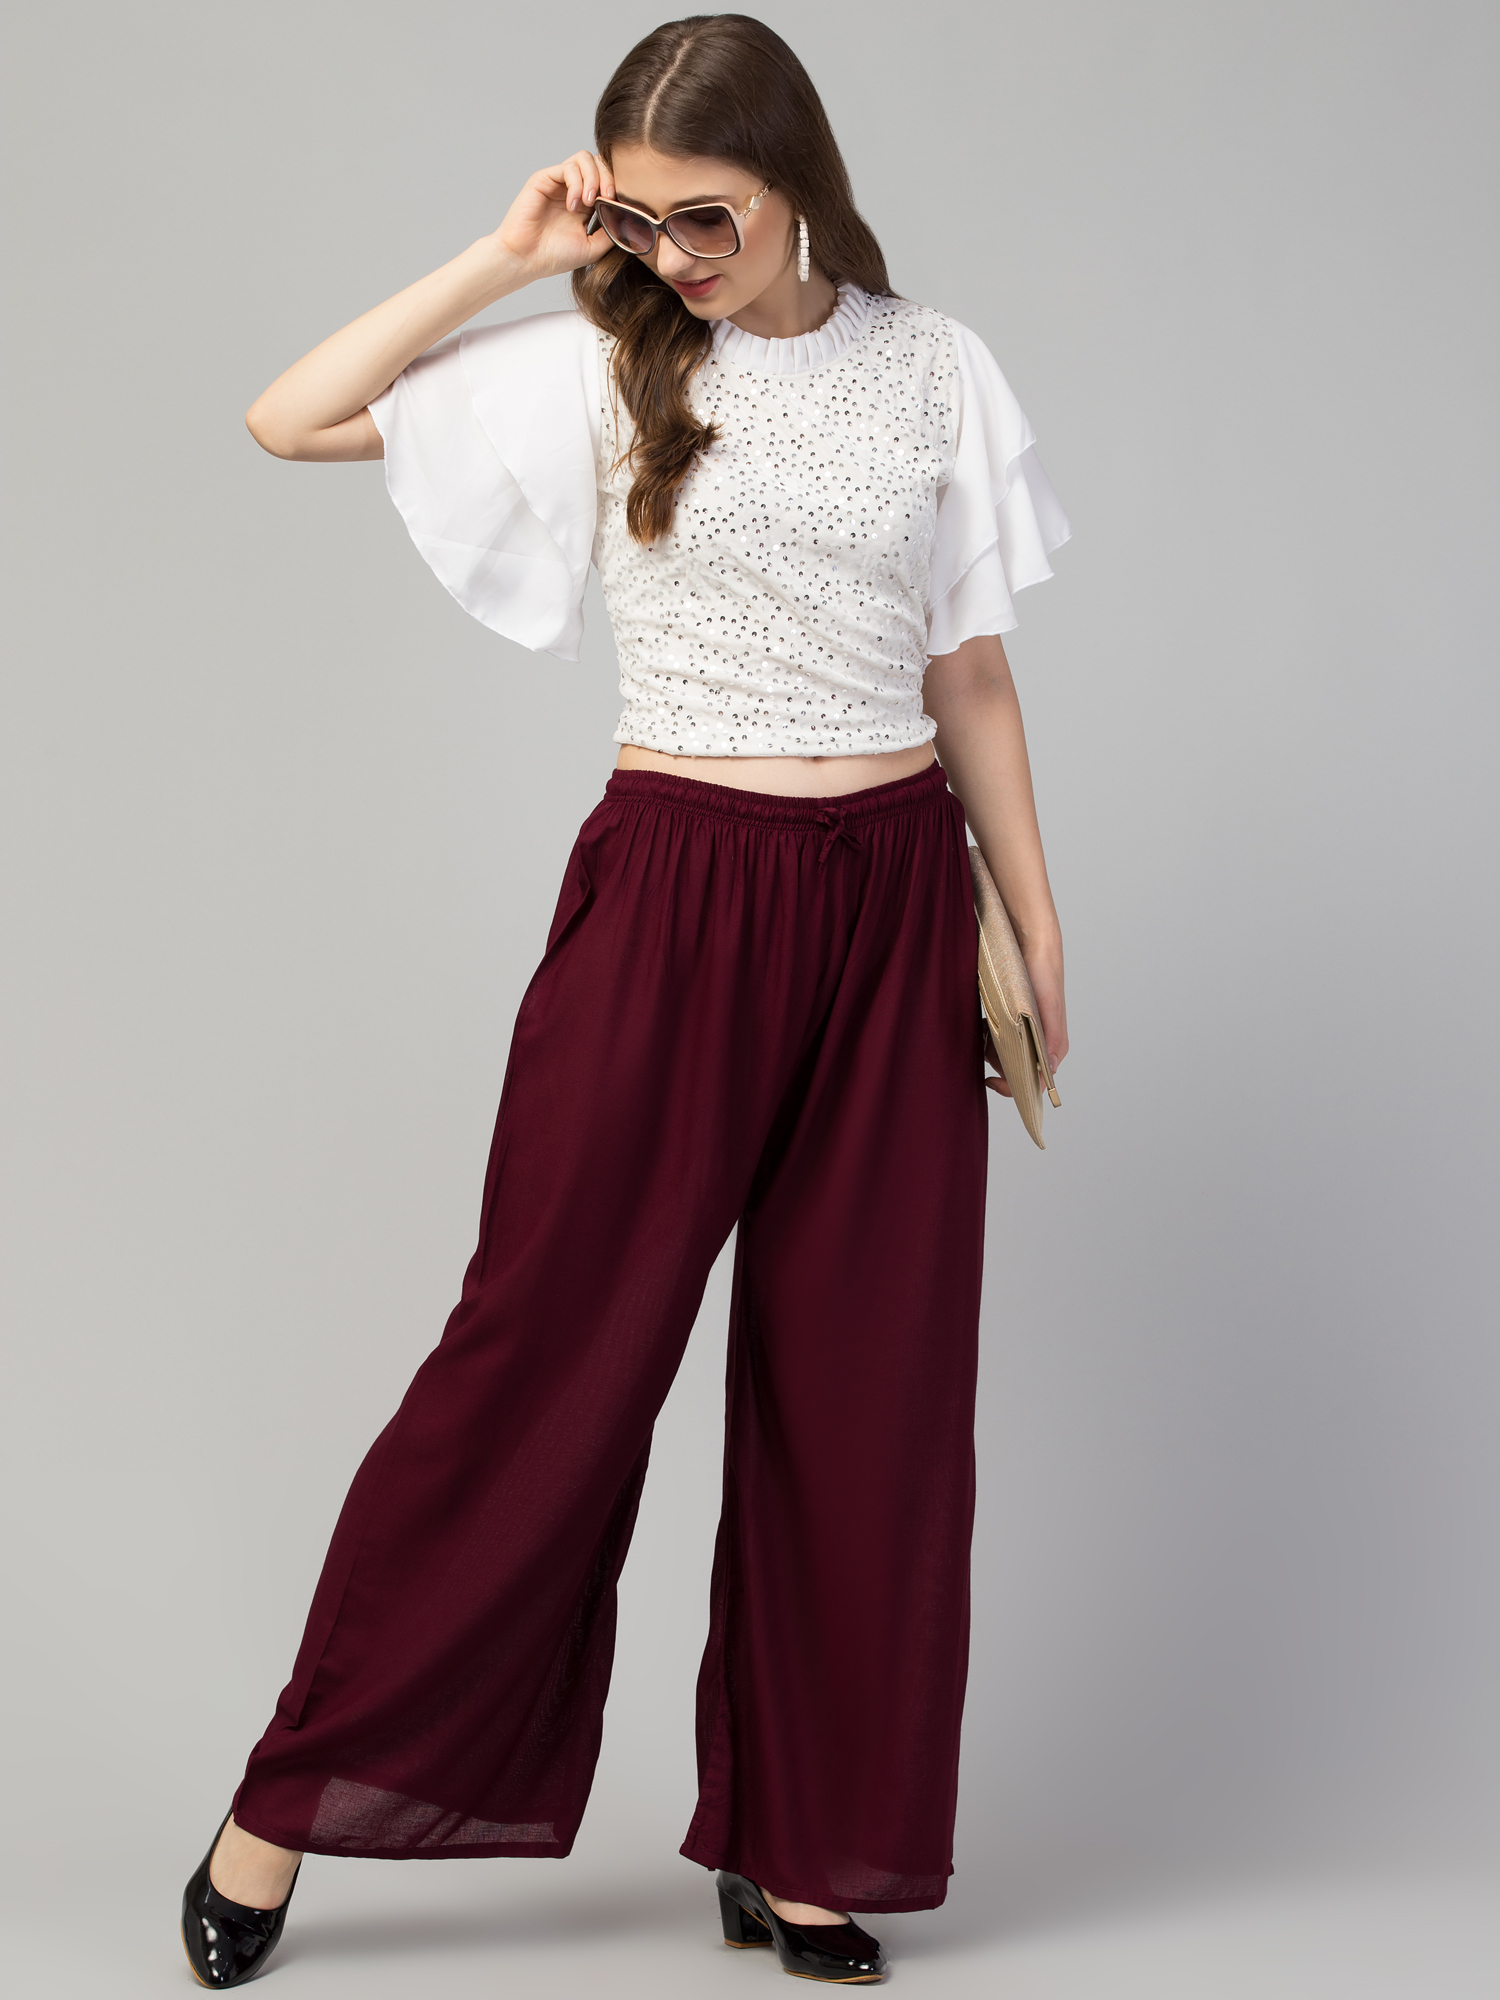 Elegant Soft Three Piece Palazzo Pants And Tops Set With Wide Leg  Fashionable Casual Wrap Top And Solid Top Outfits From Just4urwear, $23.53  | DHgate.Com